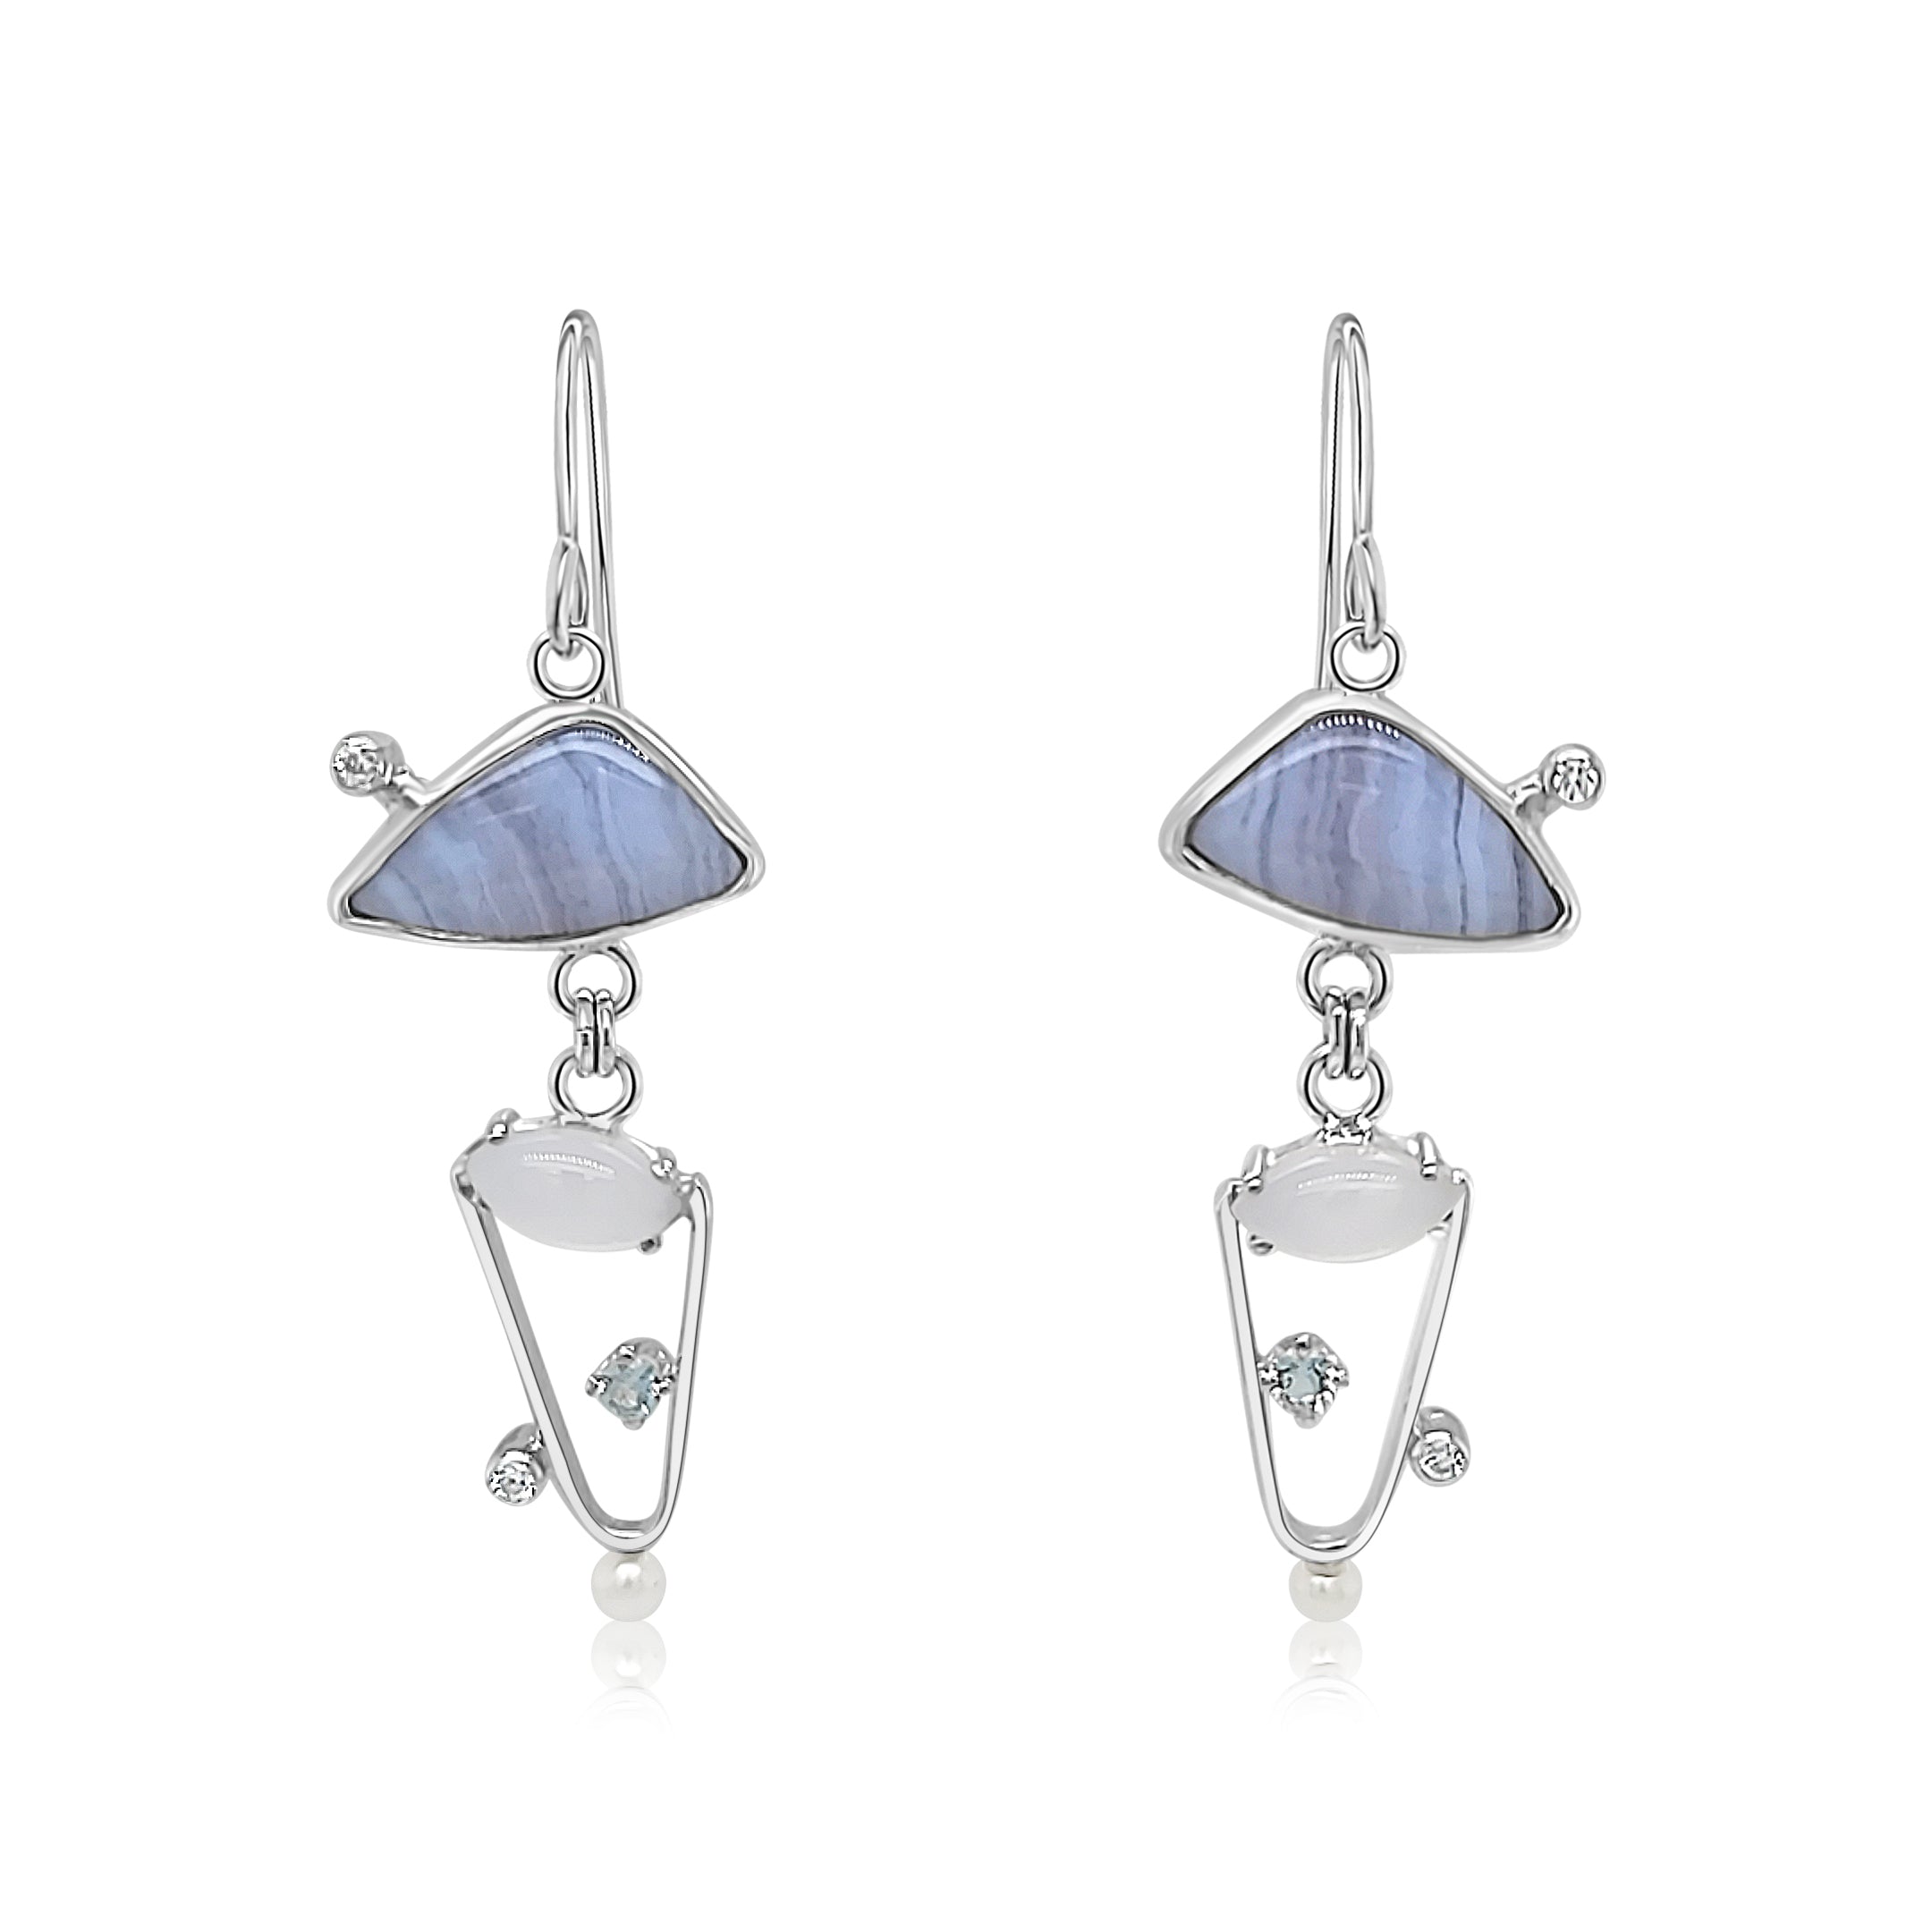 Blue Lace Agate, Chalcedony, Swiss Blue topaz, Cubic Zirconia and Freshwater Pearl earrings set in Sterling Silver.